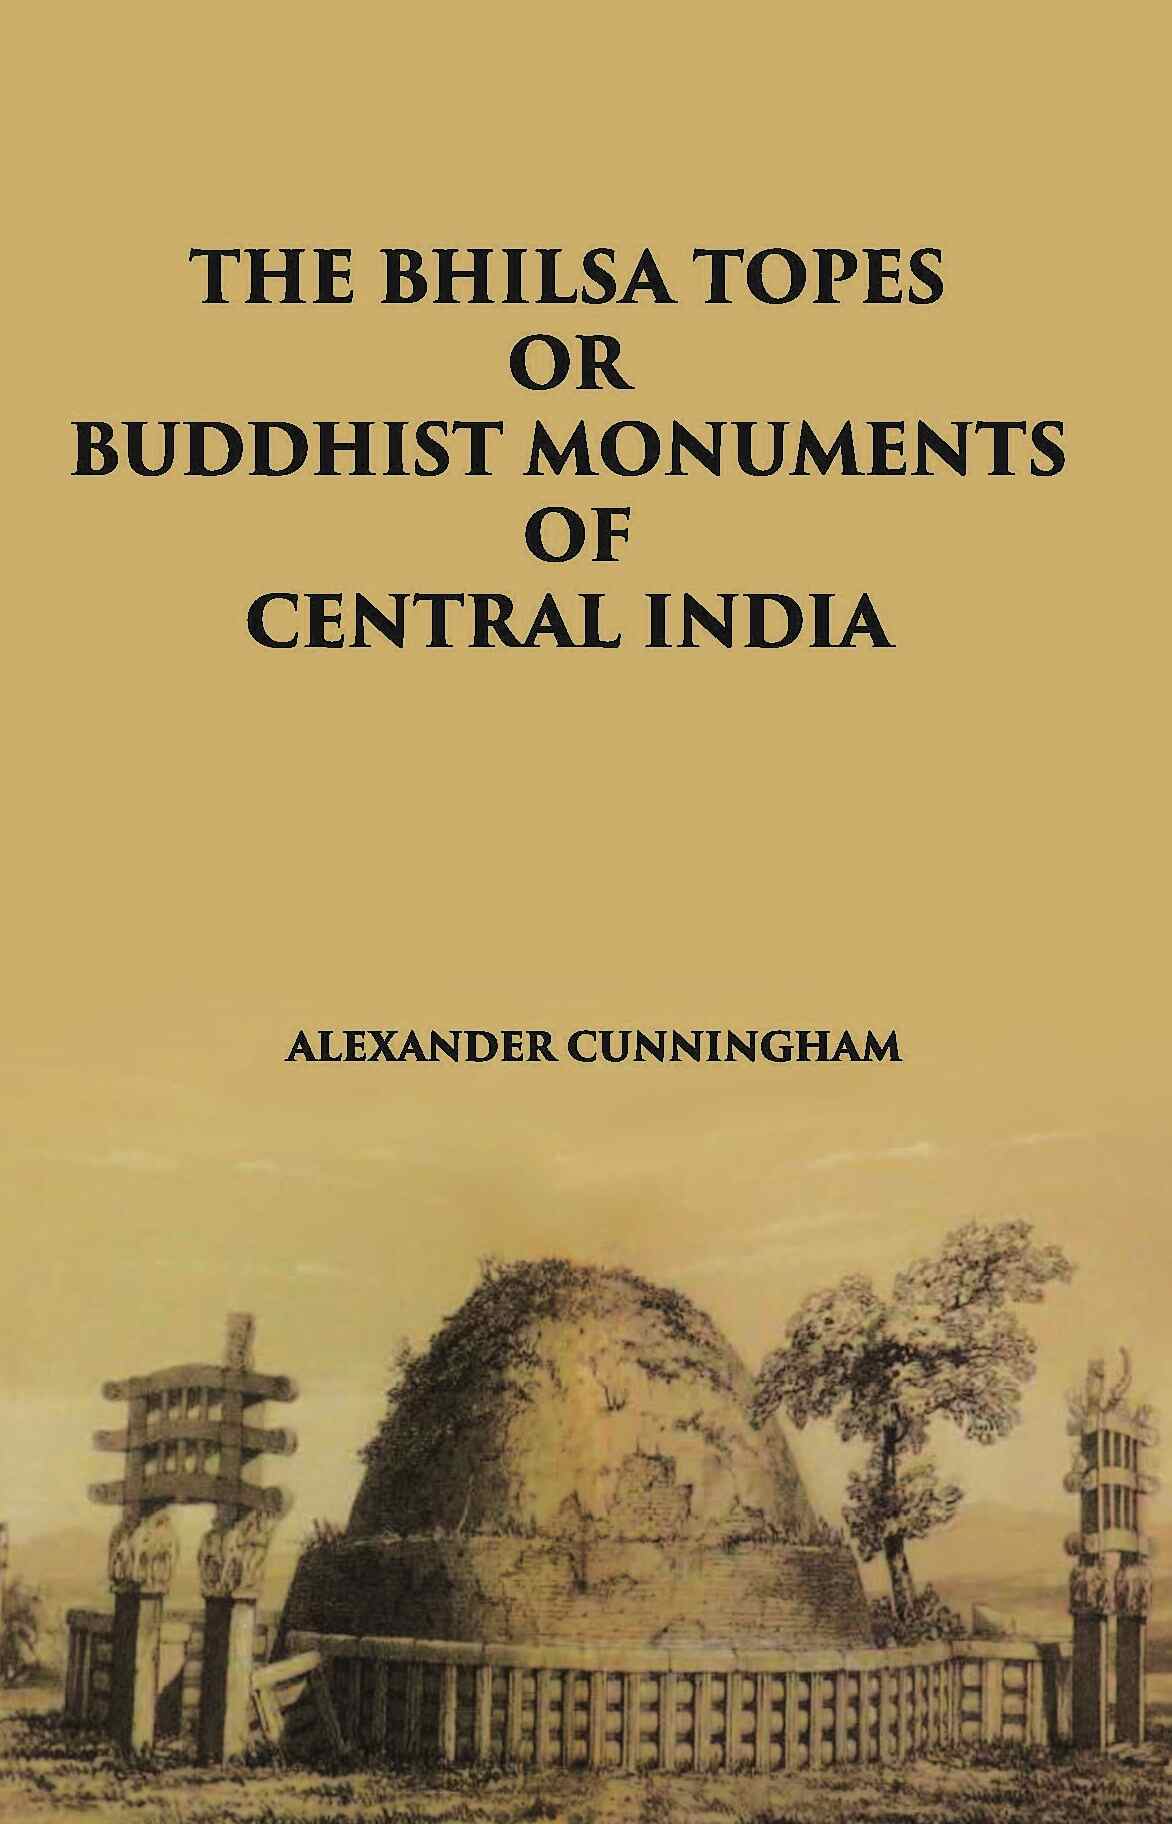 THE BHILSA TOPES OR BUDDHIST MONUMENTS OF CENTRAL INDIA 